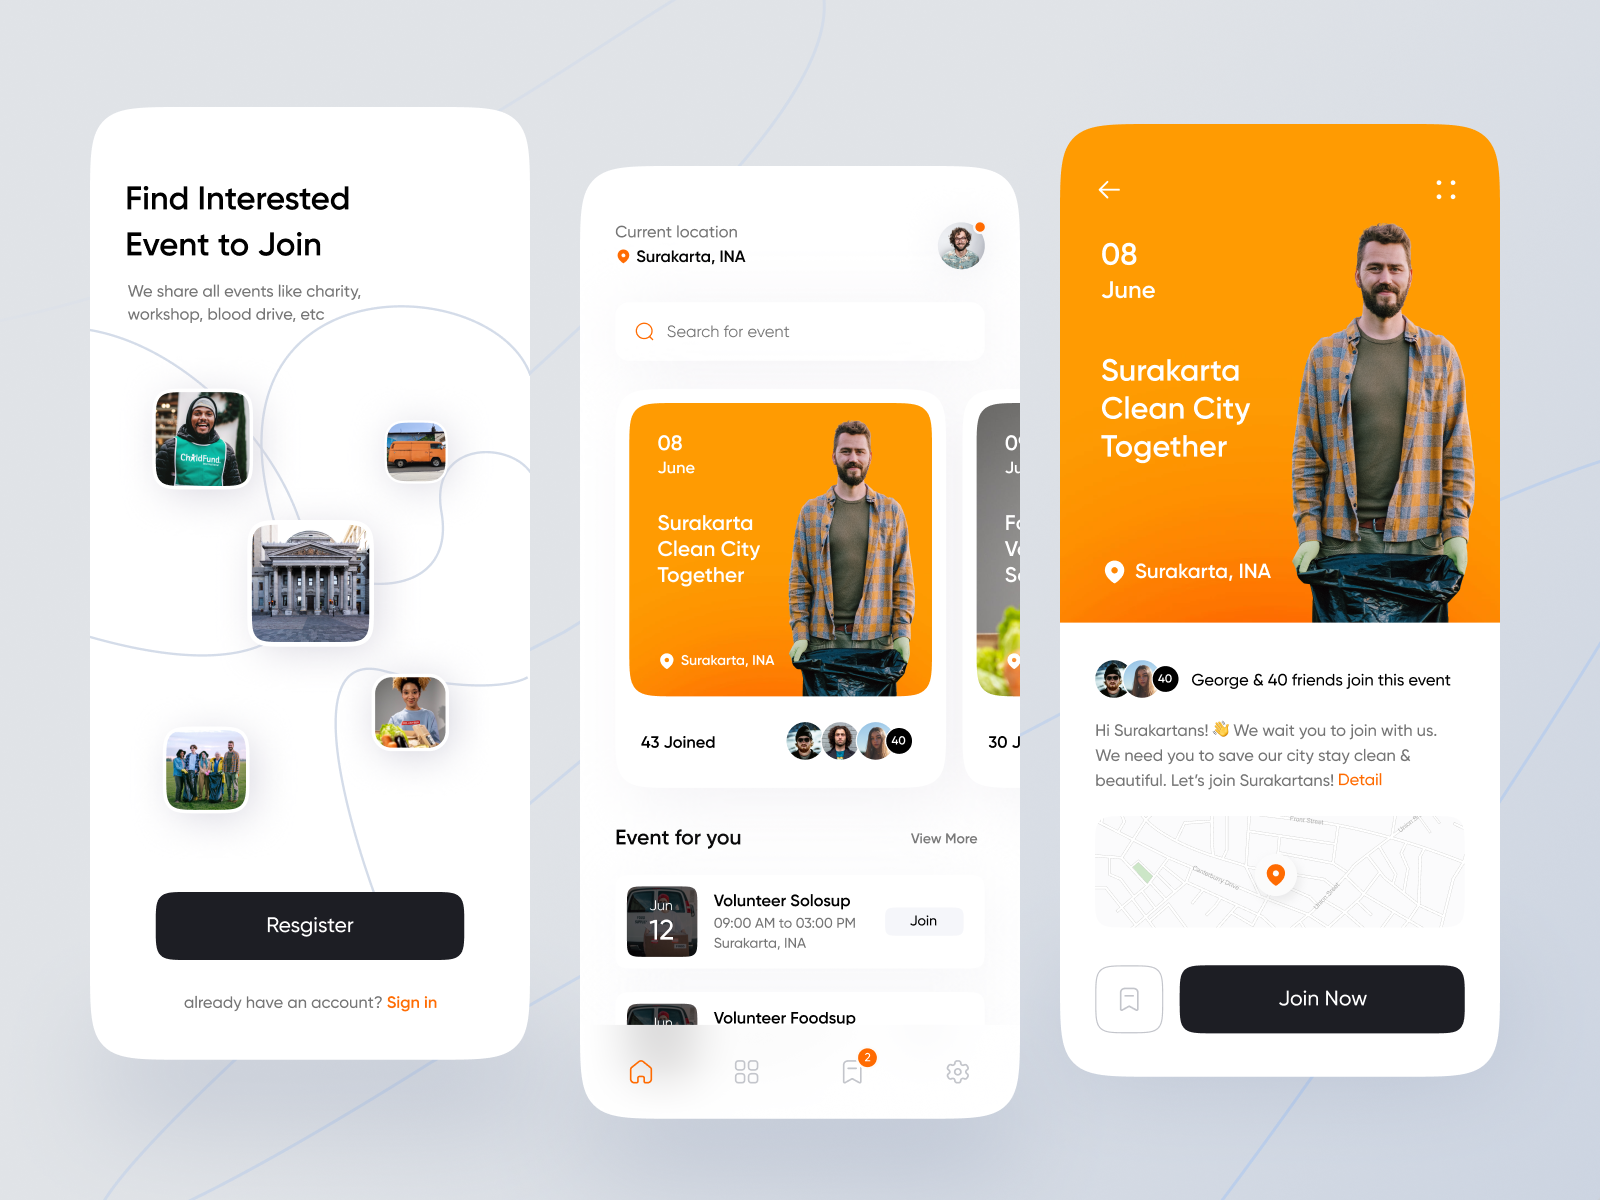 Doctor Apps Exploration by Happy Tri Milliarta on Dribbble